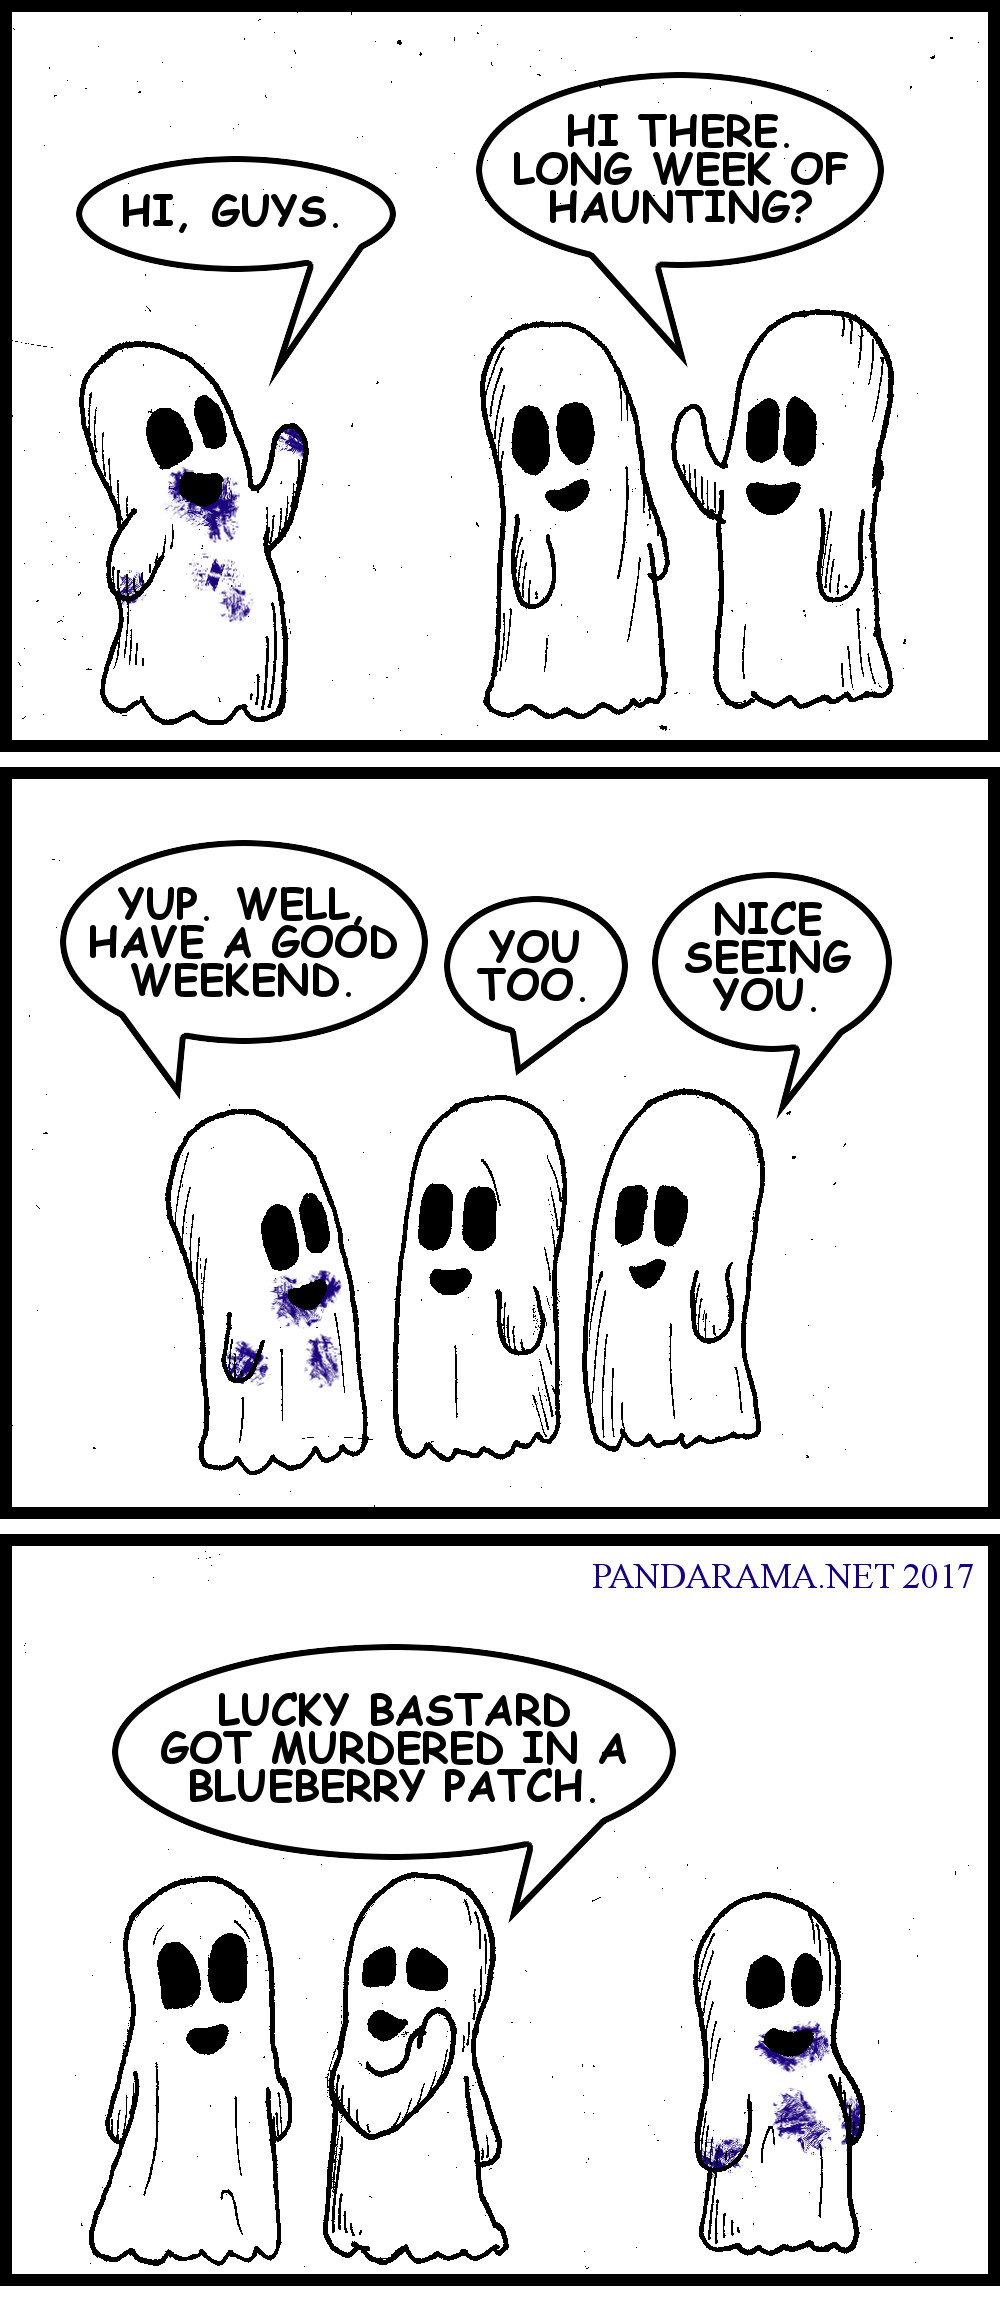 cartoon strip where ghosts are envious of a ghost that haunts a blueberry patch because that's where they were murdered.